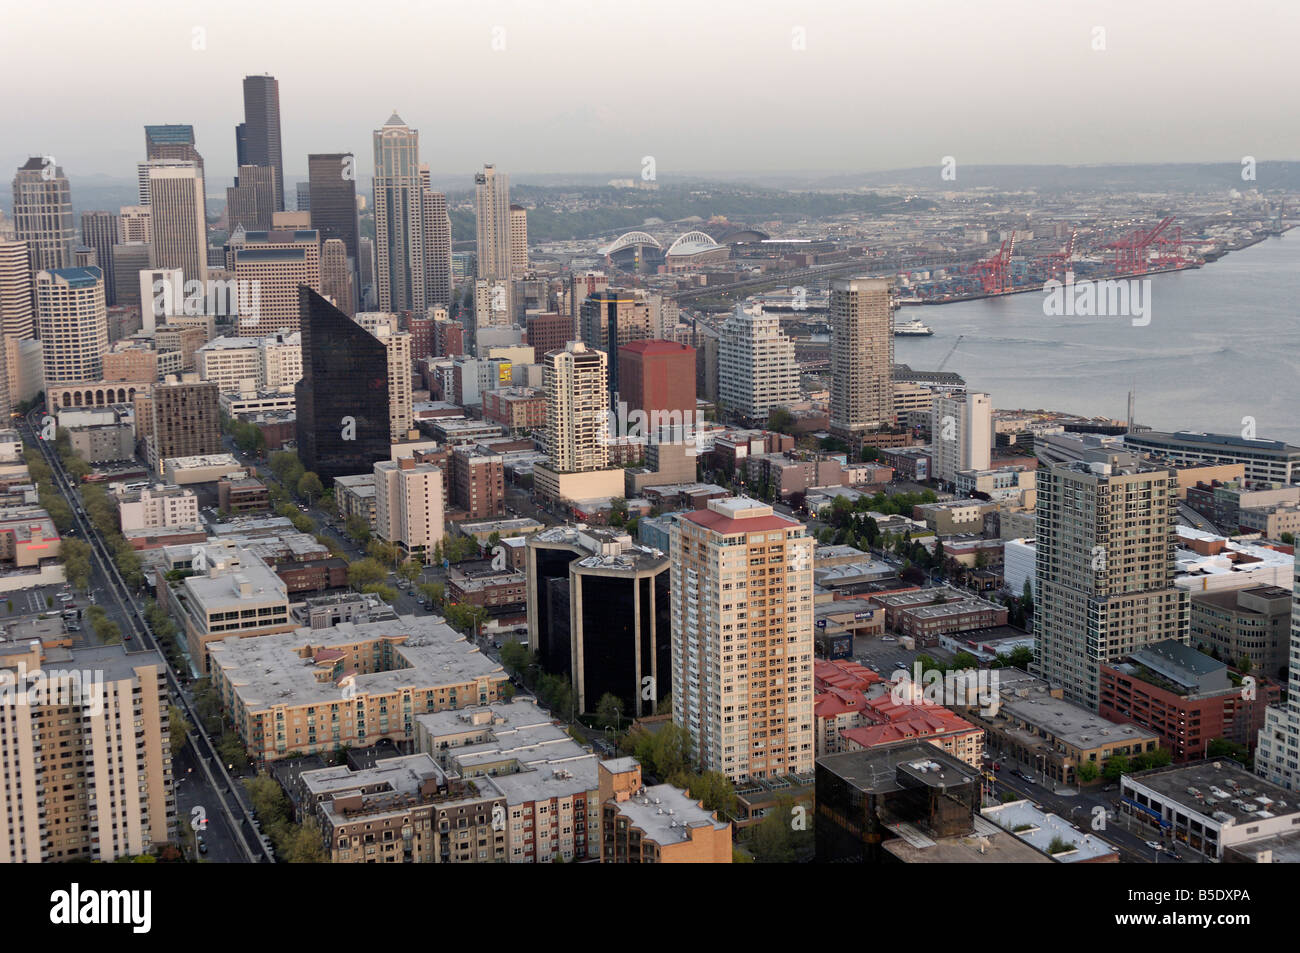 City overview from the observation deck of the Space Needle, 520 ft tall, Seattle, Washington State, USA, North America Stock Photo